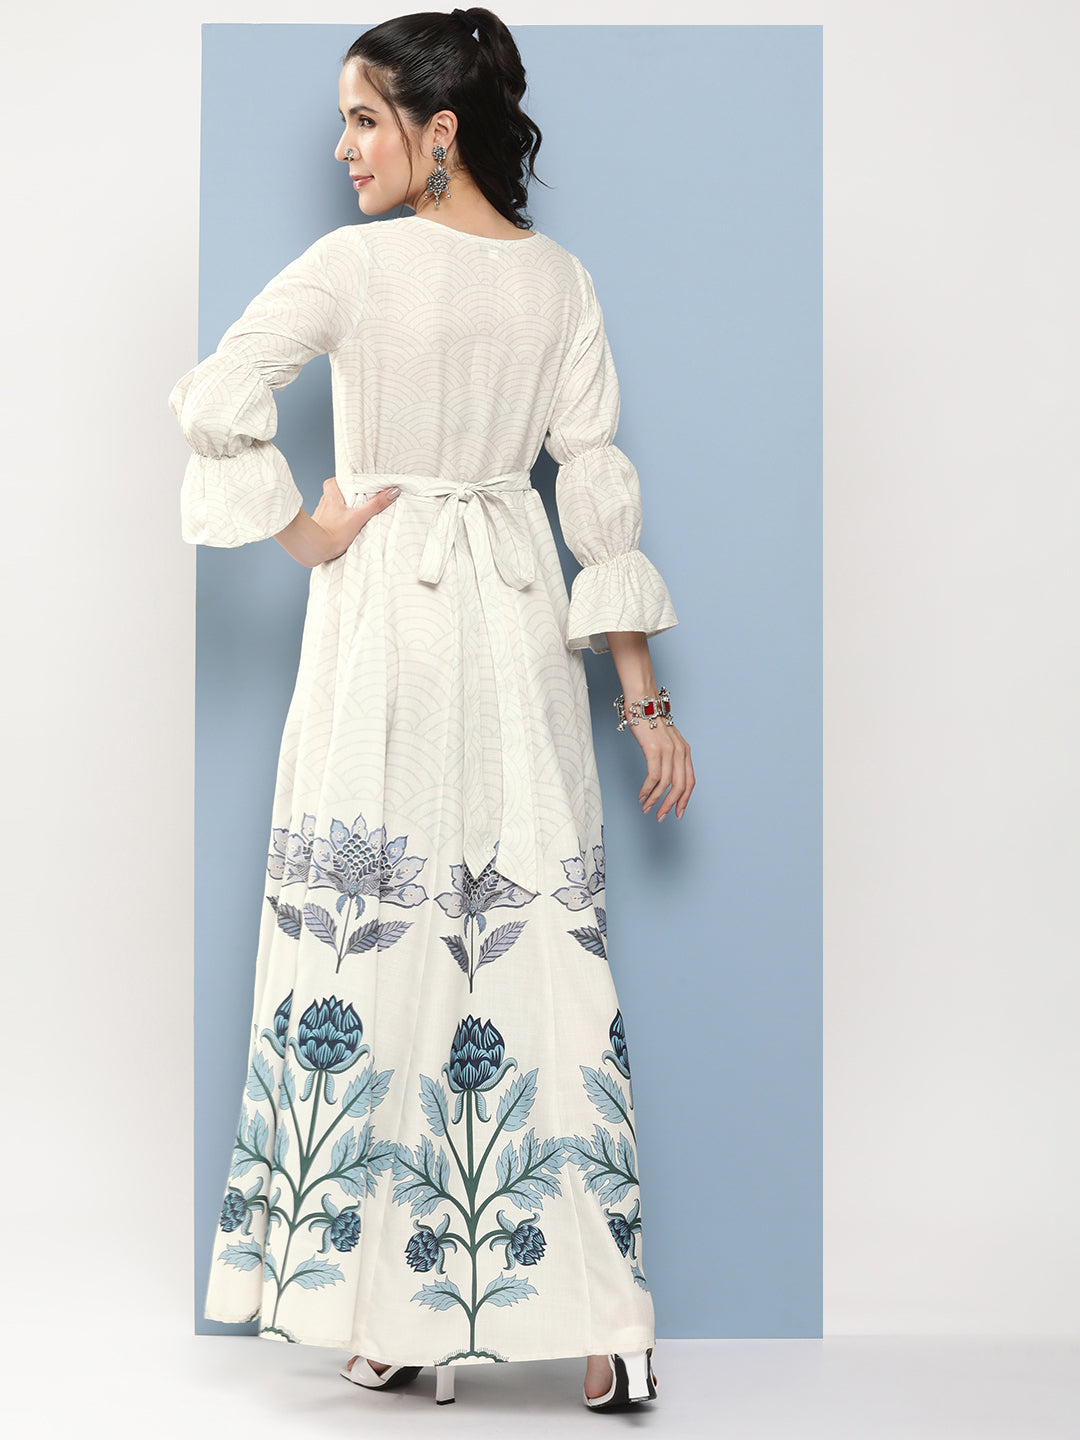 Women's Off-White & Blue Printed Long Dress With Waist Belt - Bhama Couture